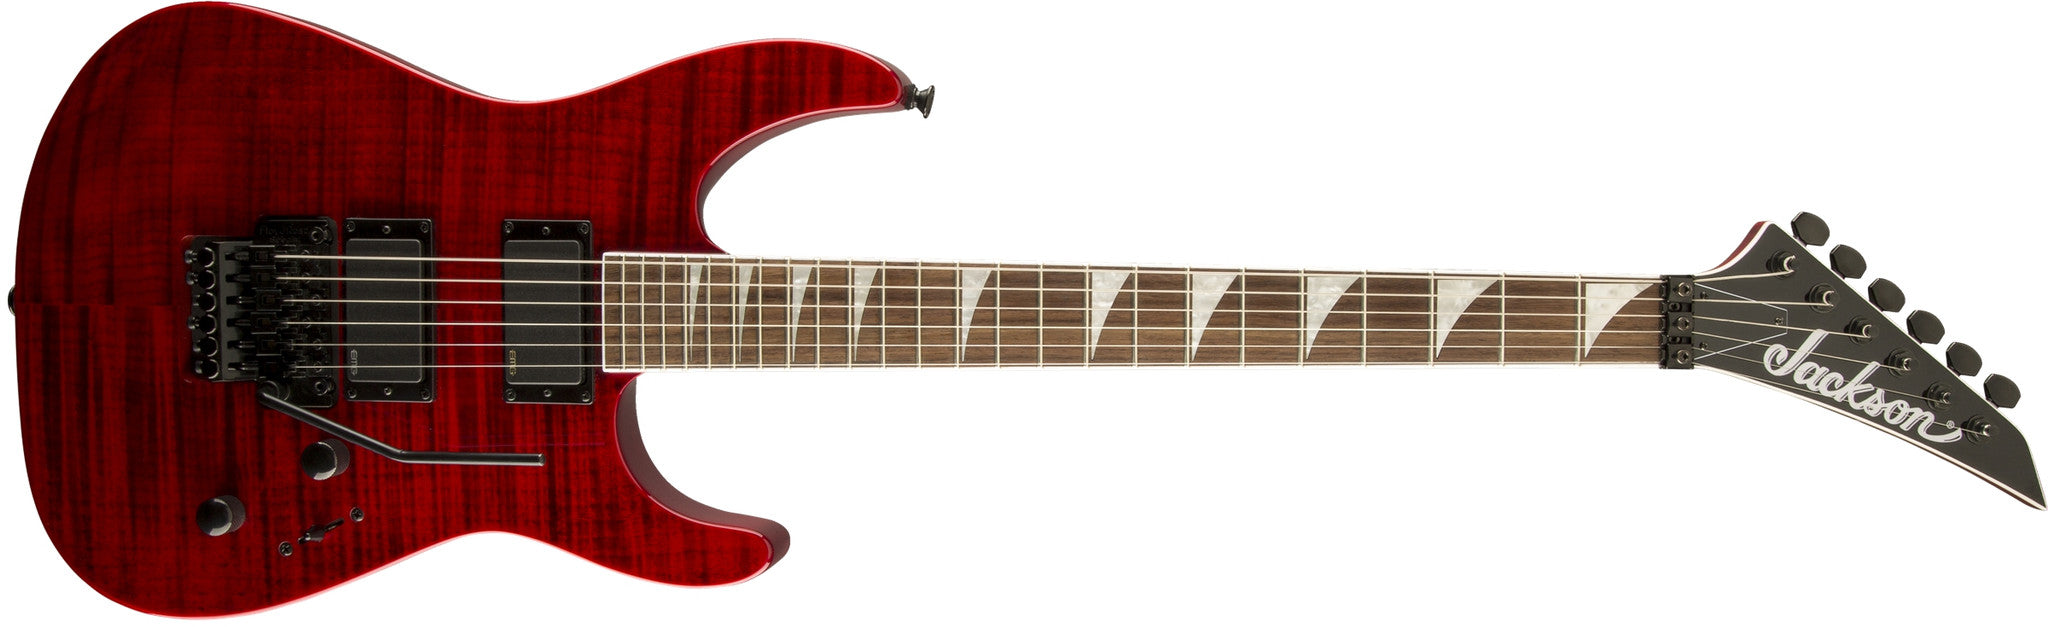 Jackson SLXFMG Soloist, Rosewood Fingerboard, Transparent Red 2916341503 - L.A. Music - Canada's Favourite Music Store!